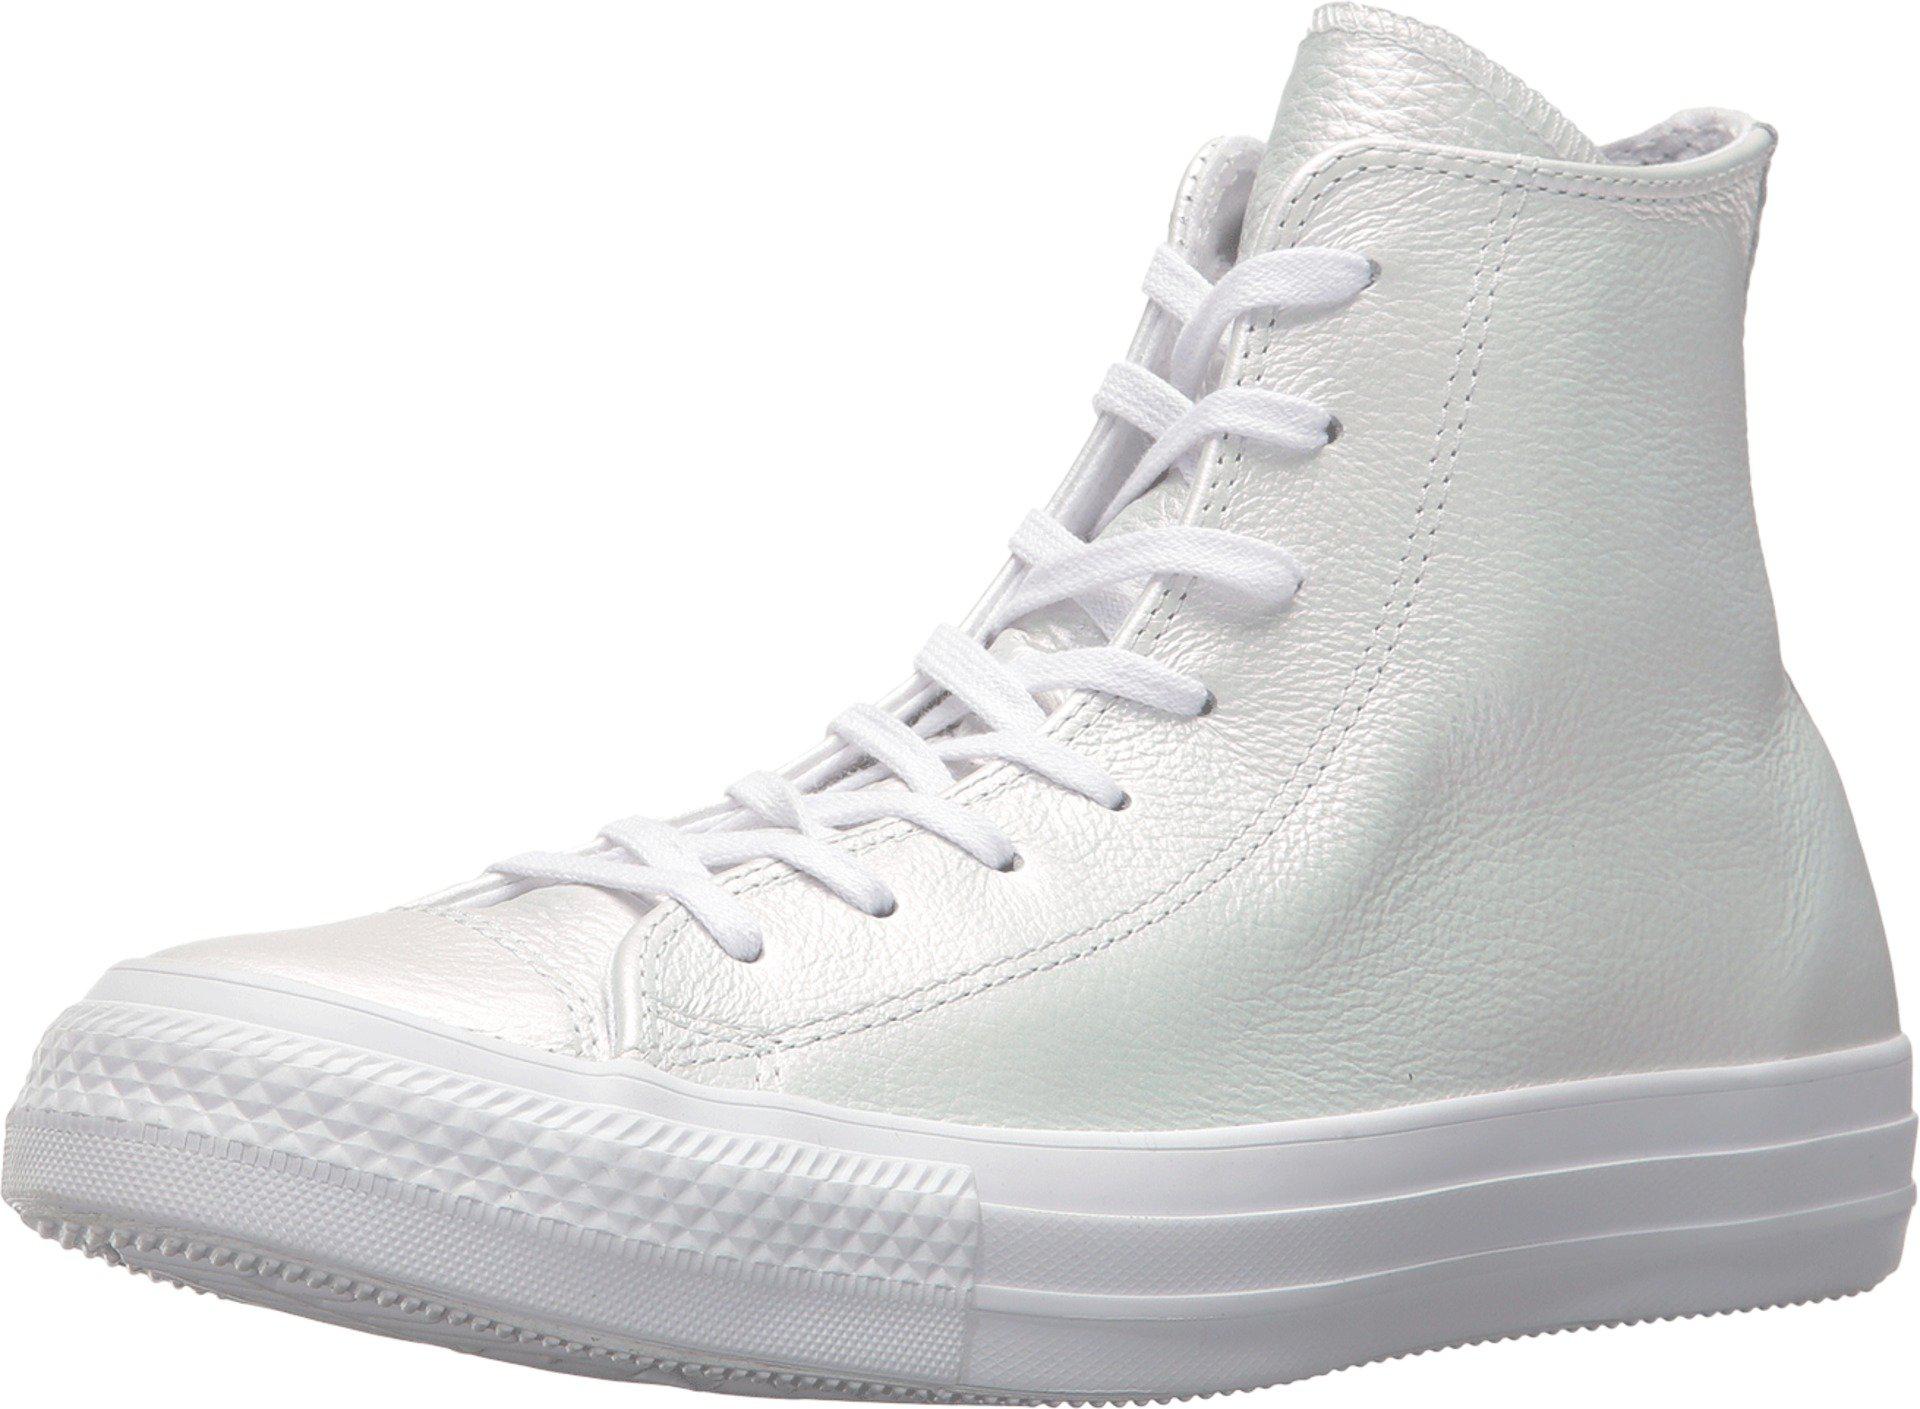 Converse Chuck Taylor® All Star® Iridescent Leather Hi in White - Lyst